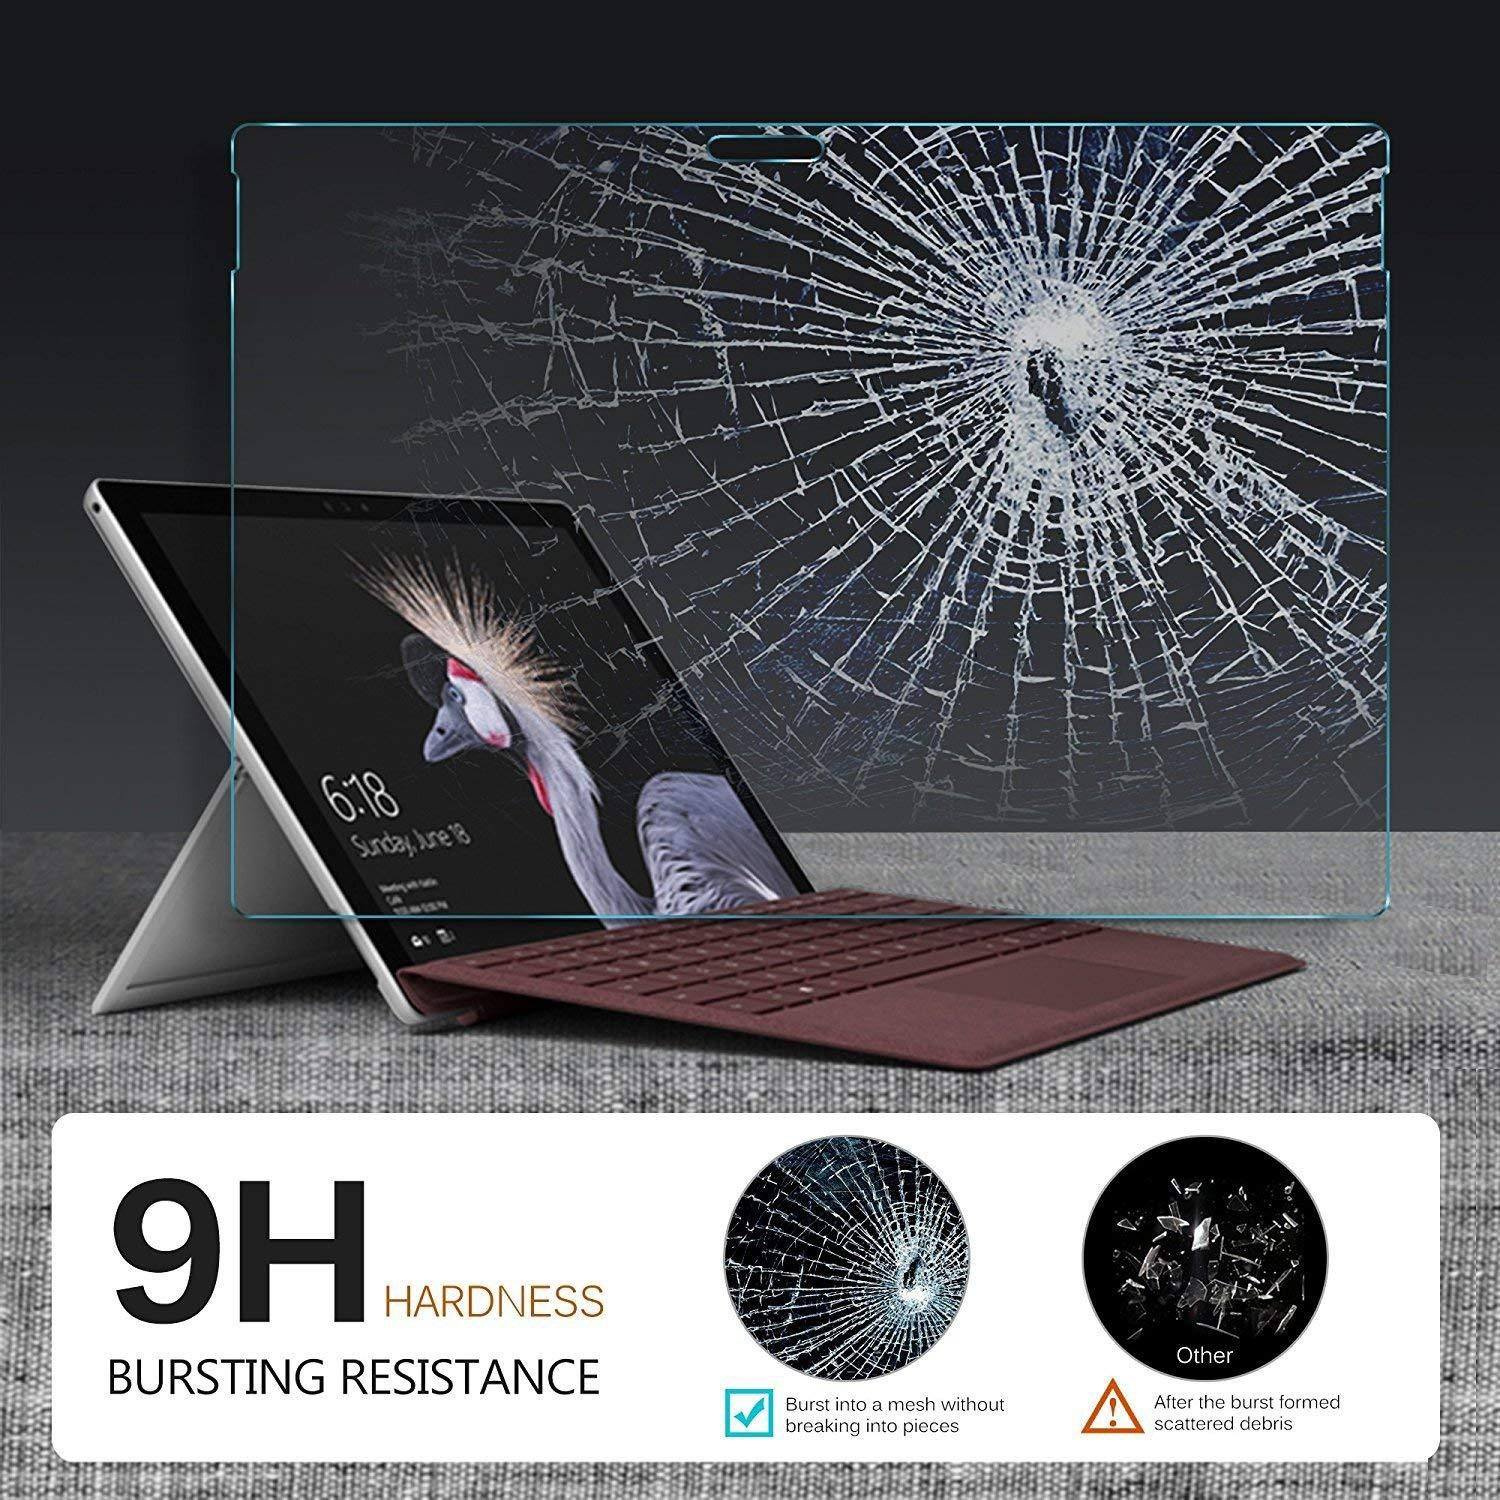 ZEELOT PureGlass 2.5D Clear Tempered Glass Screen Protector for Microsoft Surface Pro 4/5 Tempered Glass Zeelot 